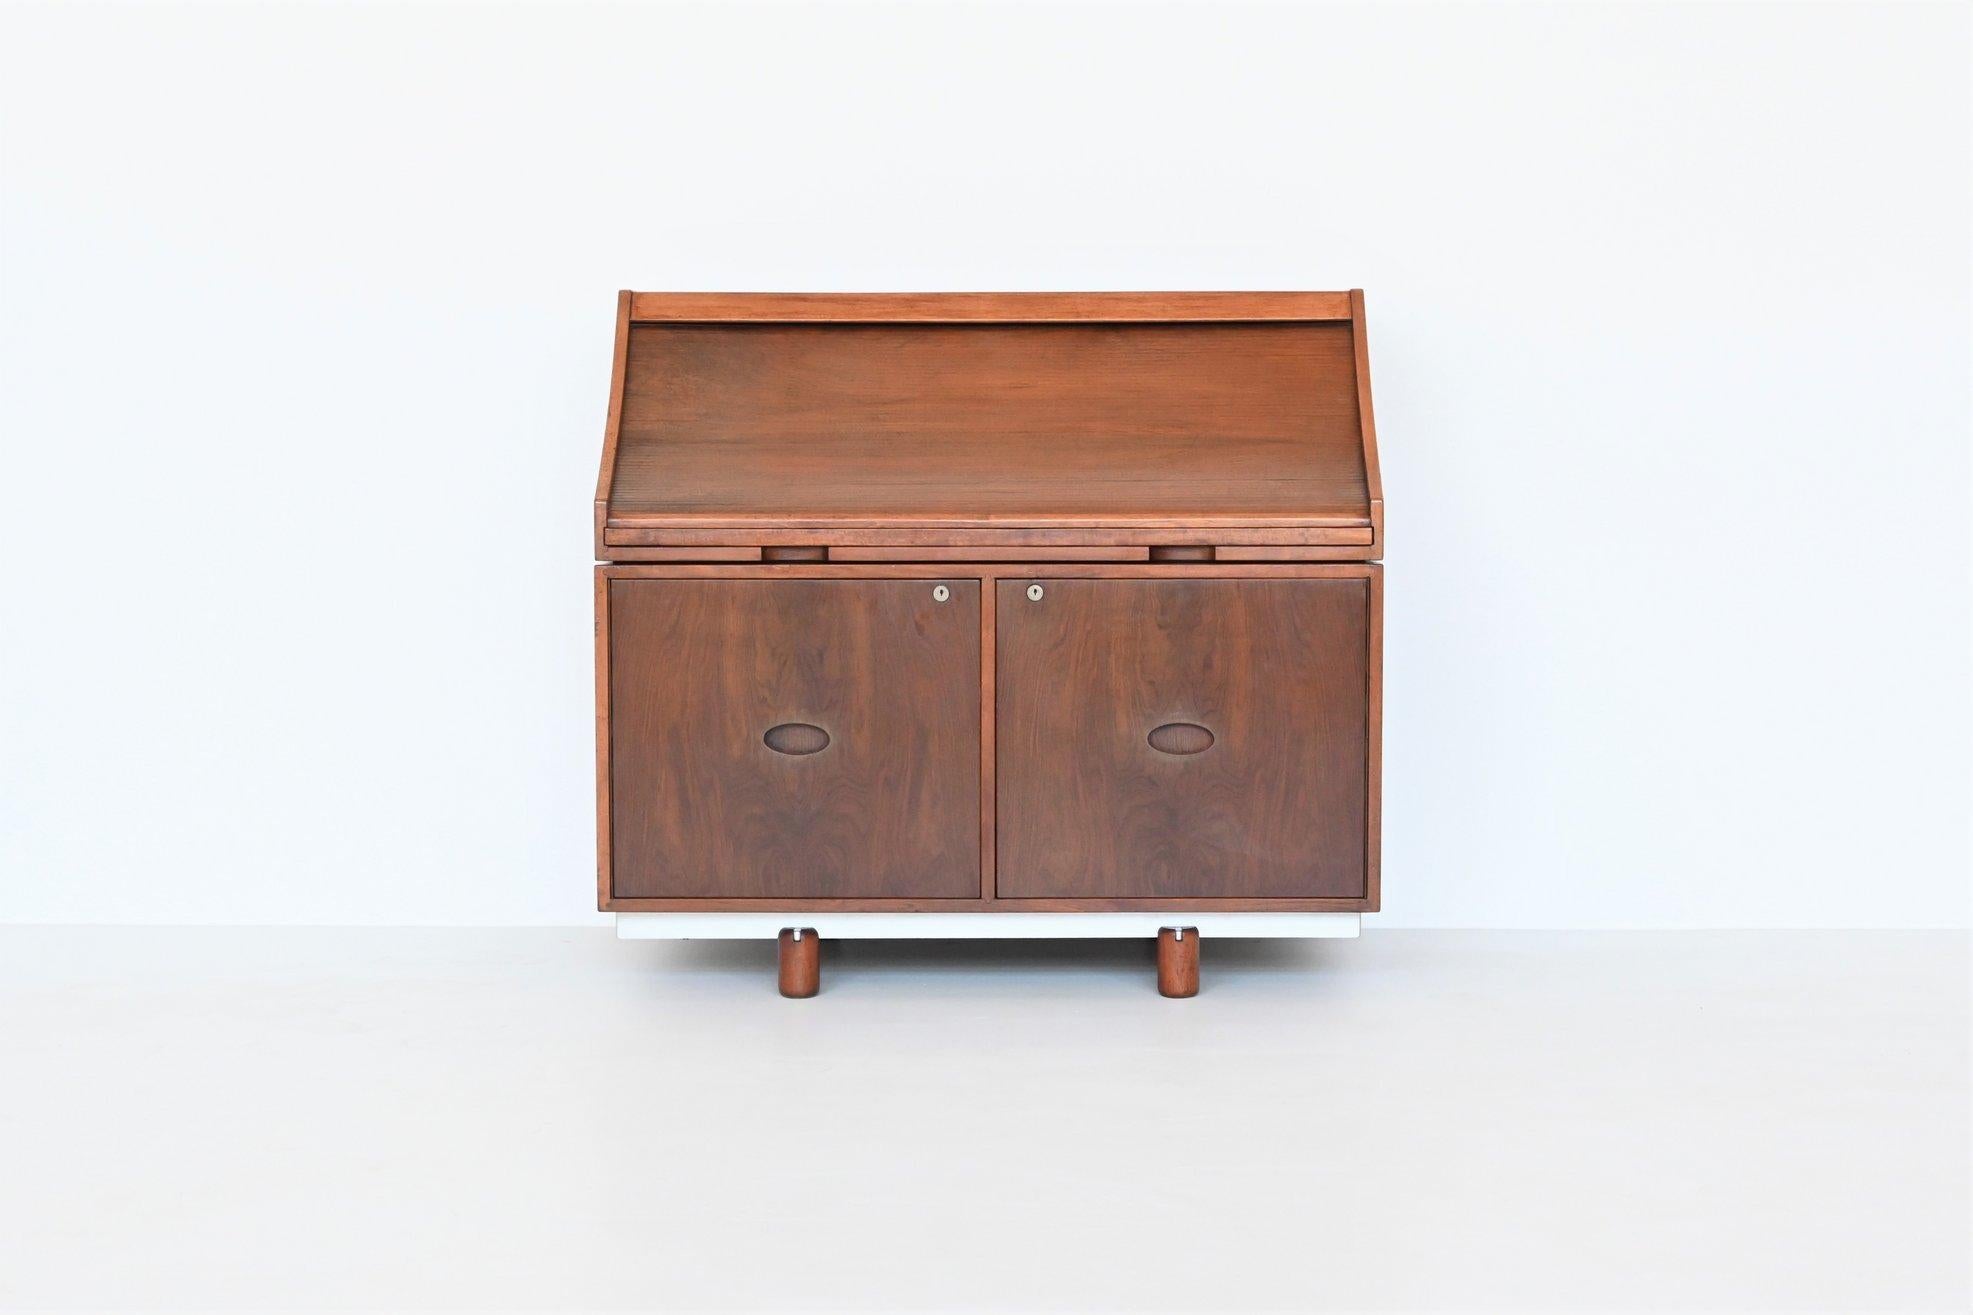 Beautiful well-crafted writing desk or secretary model 807 designed by Gianfranco Frattini for Bernini, Italy 1961. This multifunctional secretary is executed in nicely grained walnut wood with aluminium and leather details. The roll top tambour